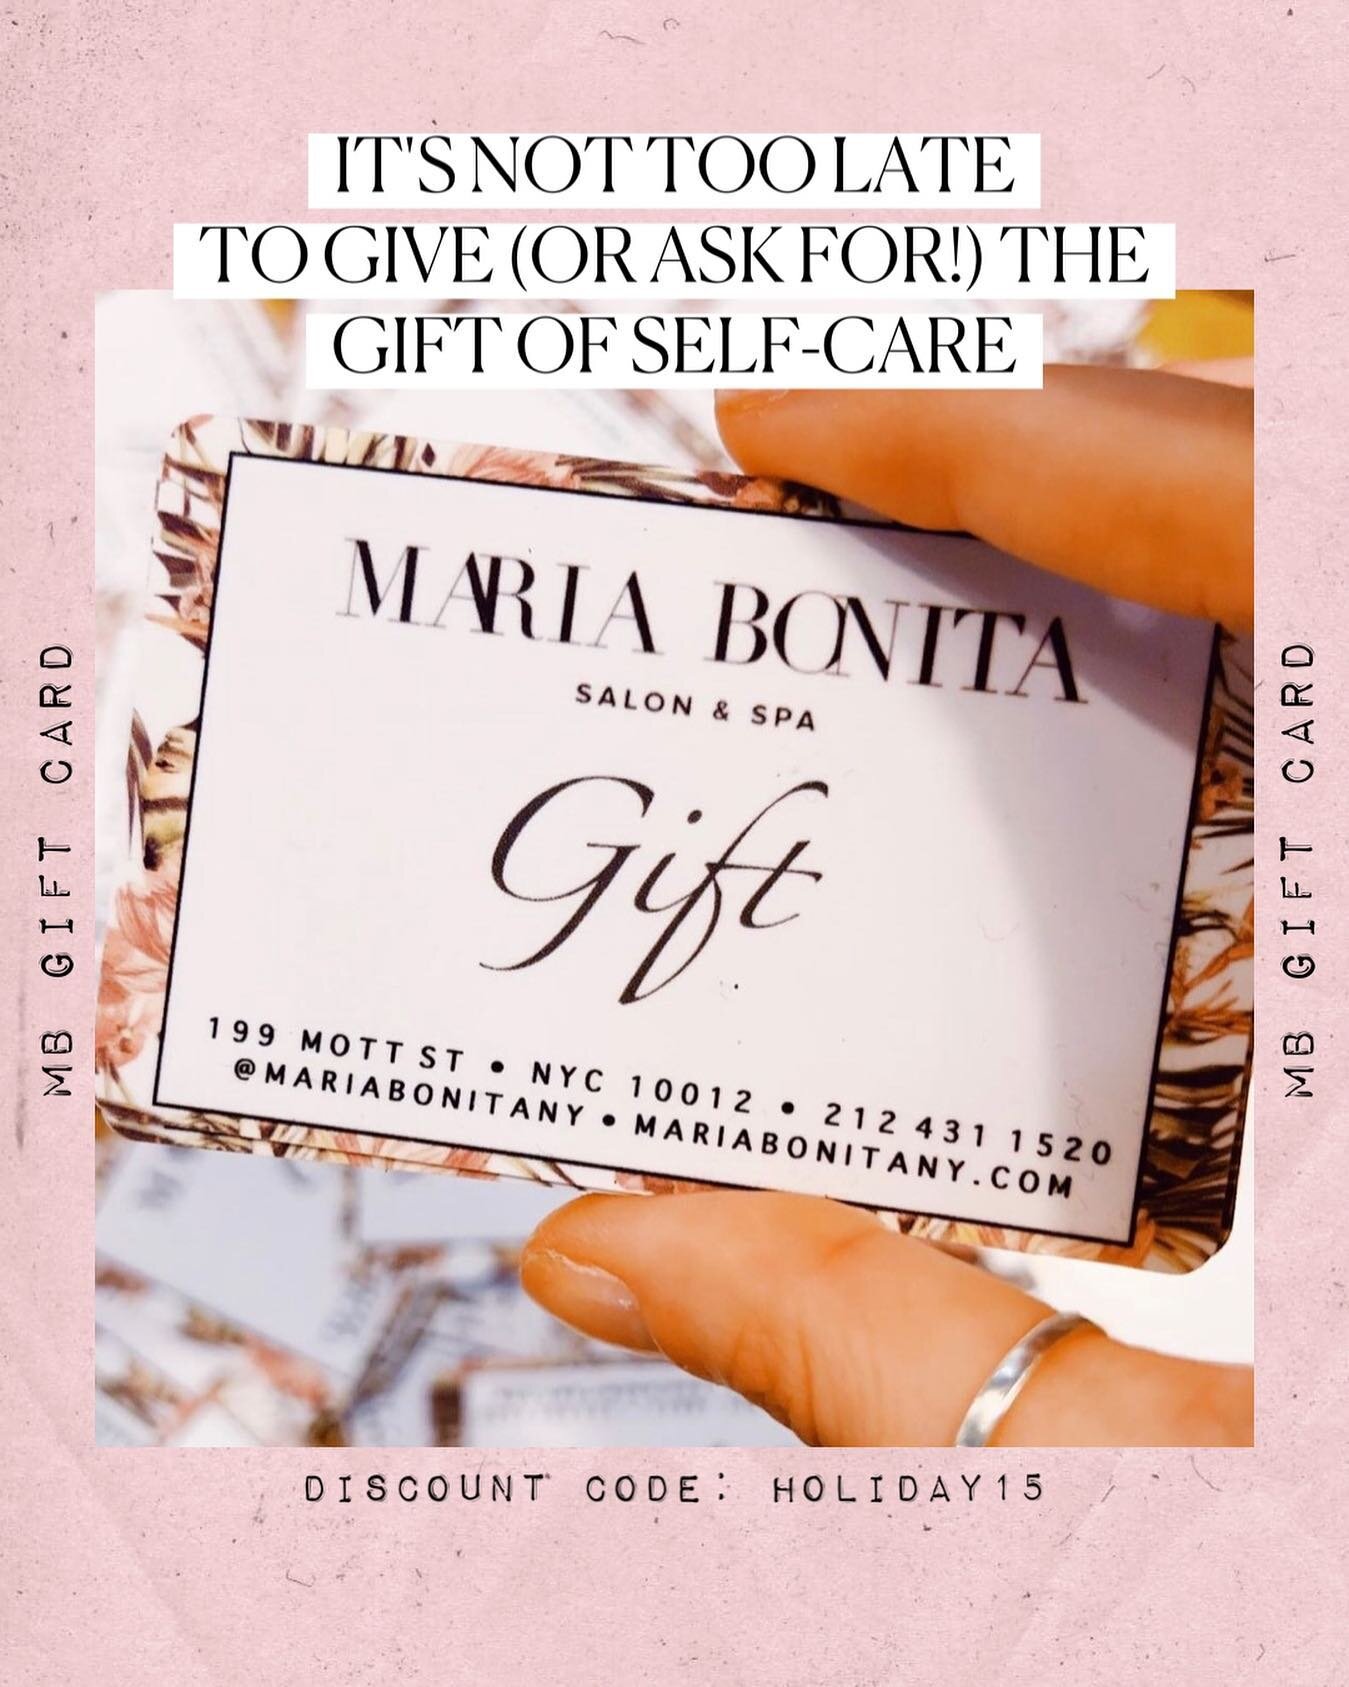 We show love with care and beauty! Get now a gift card for your special person 🤍 #mariabonitany 

#holidayseason 
#giftcard
#beauty 
#selfcare
#nyc
#spa 
#soho